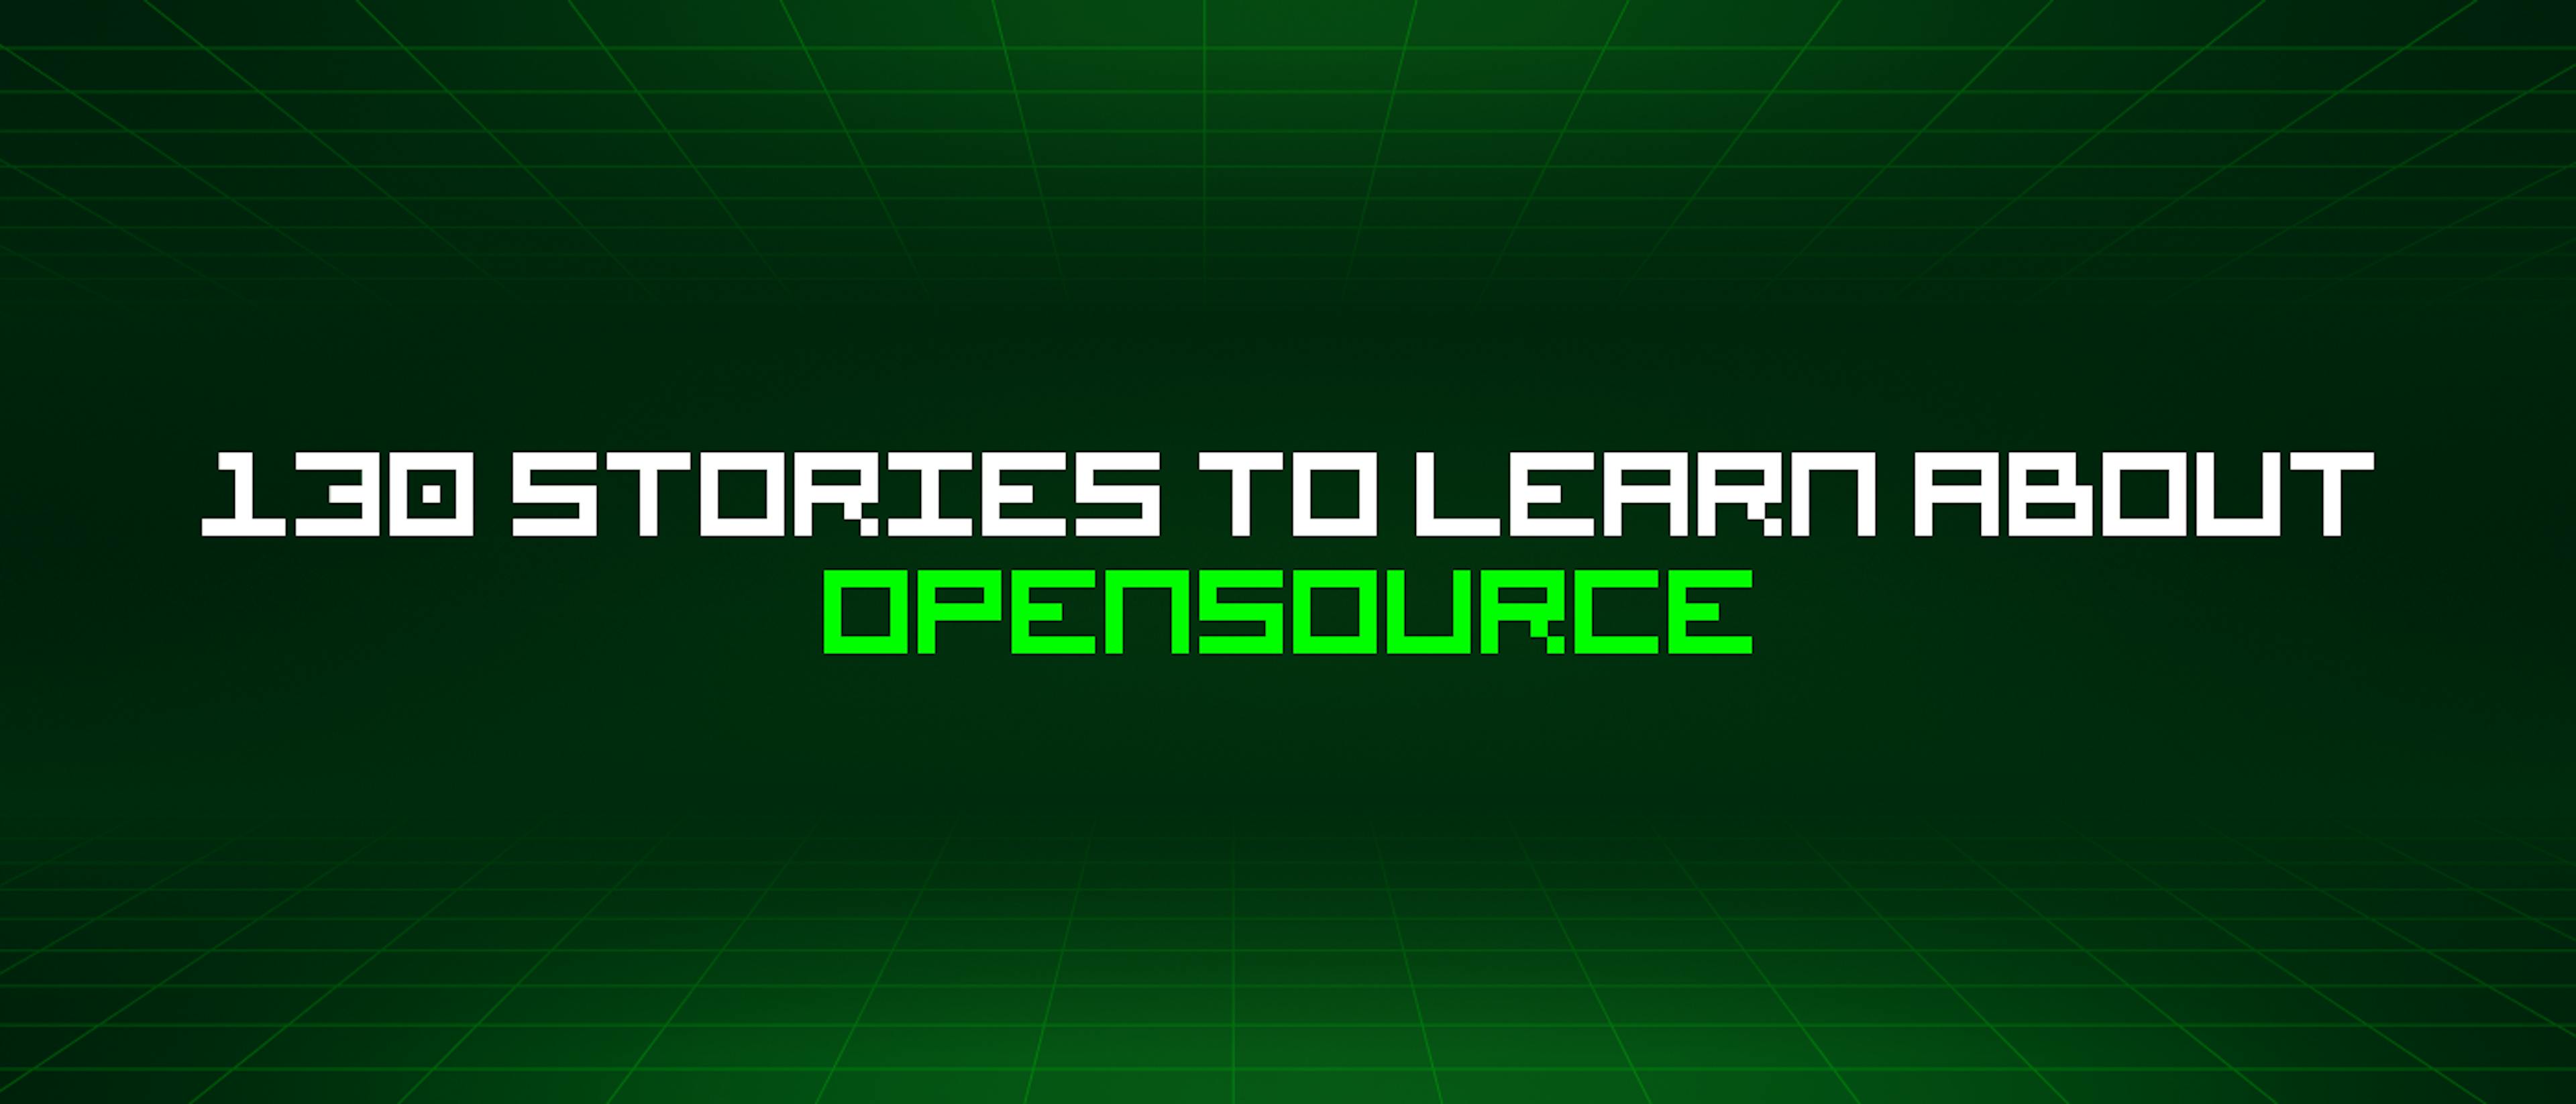 featured image - 130 Stories To Learn About Opensource